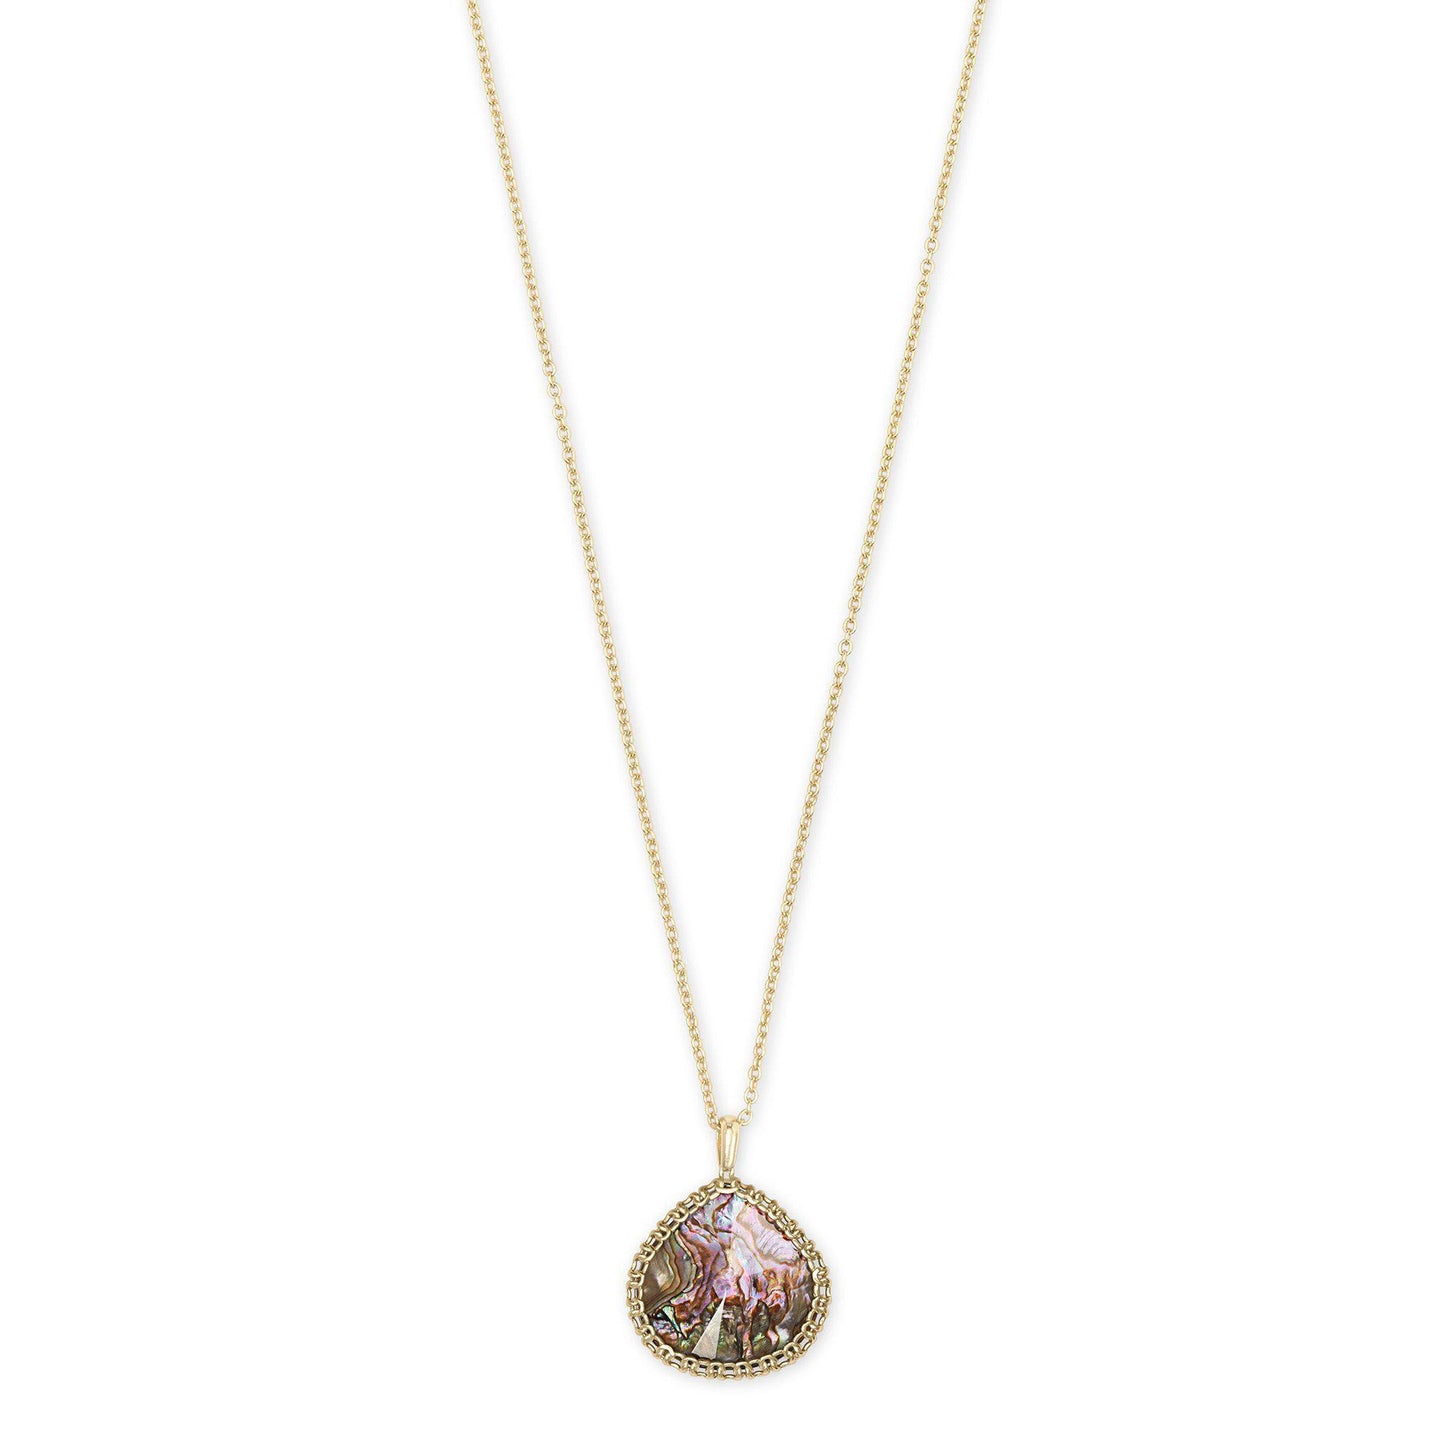 Kenzie Small Long Pendant Necklace in Gold Nude Abalone